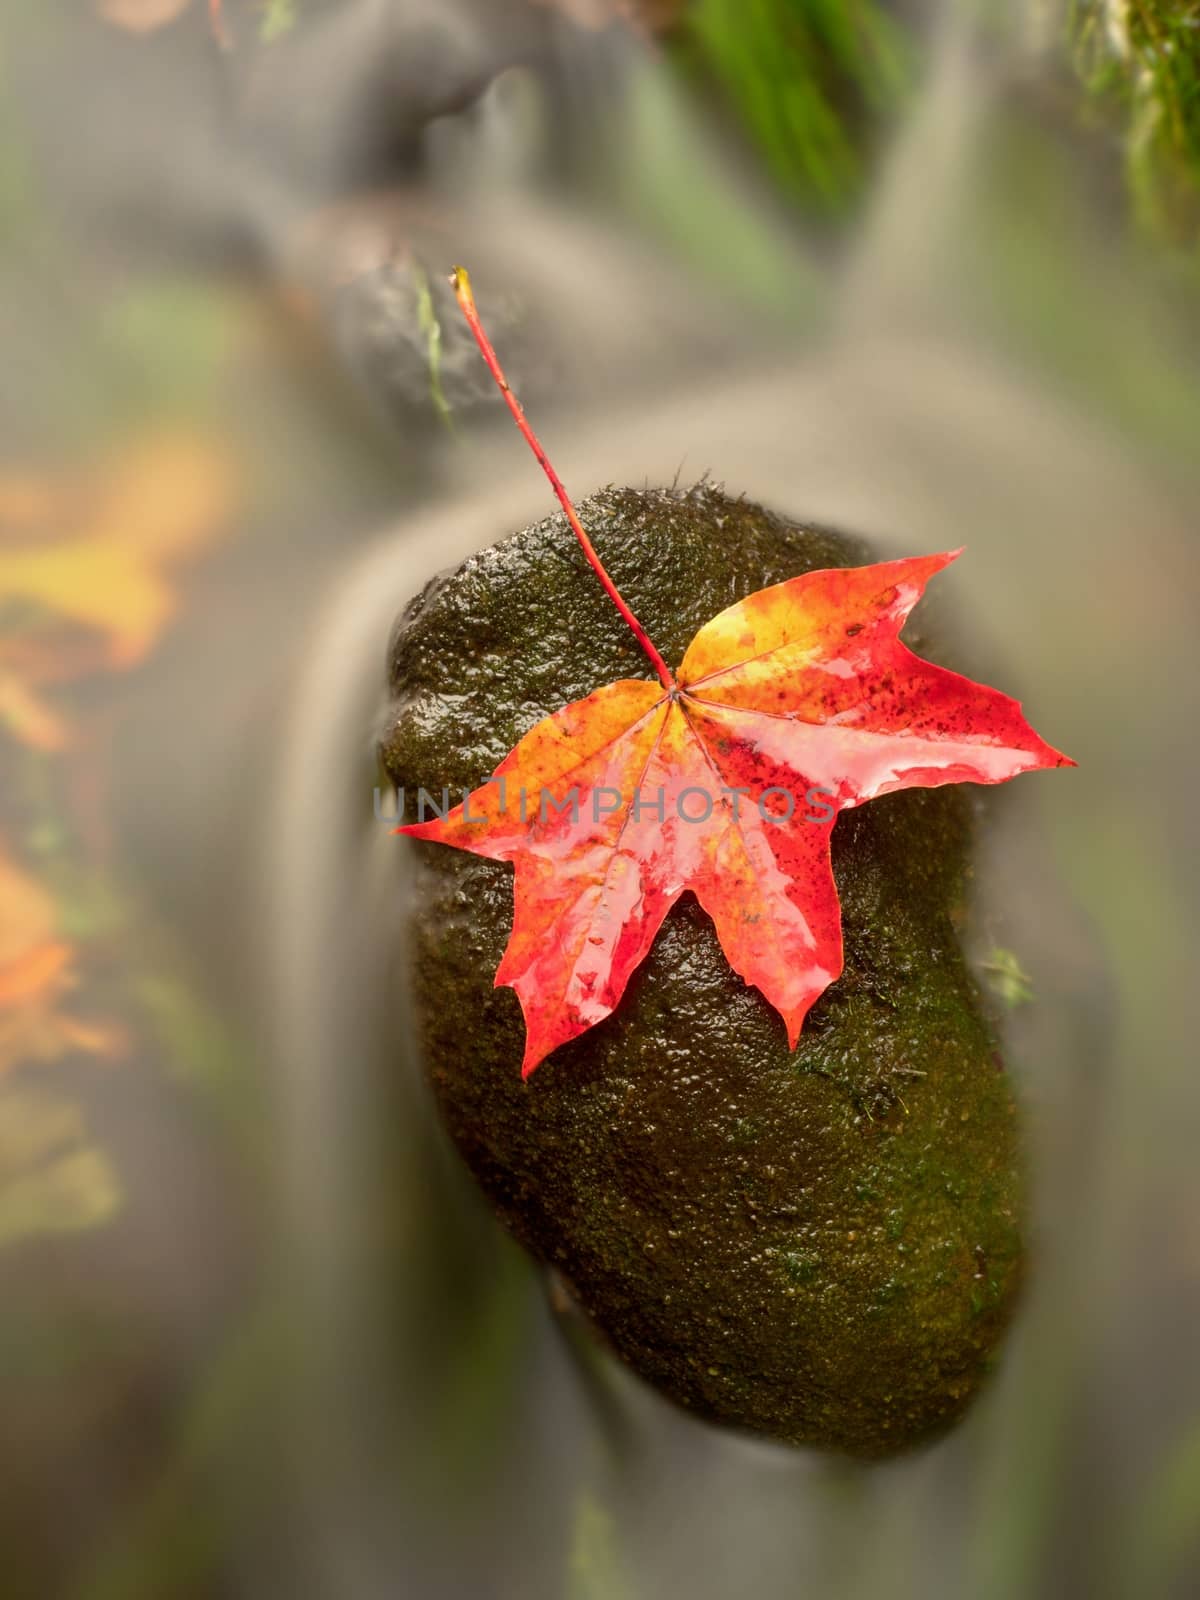 Fallen maple leaf. Rotten yellow orange dotted maple leaf in cold water of mountain stream. Colorful autumn symbol.  